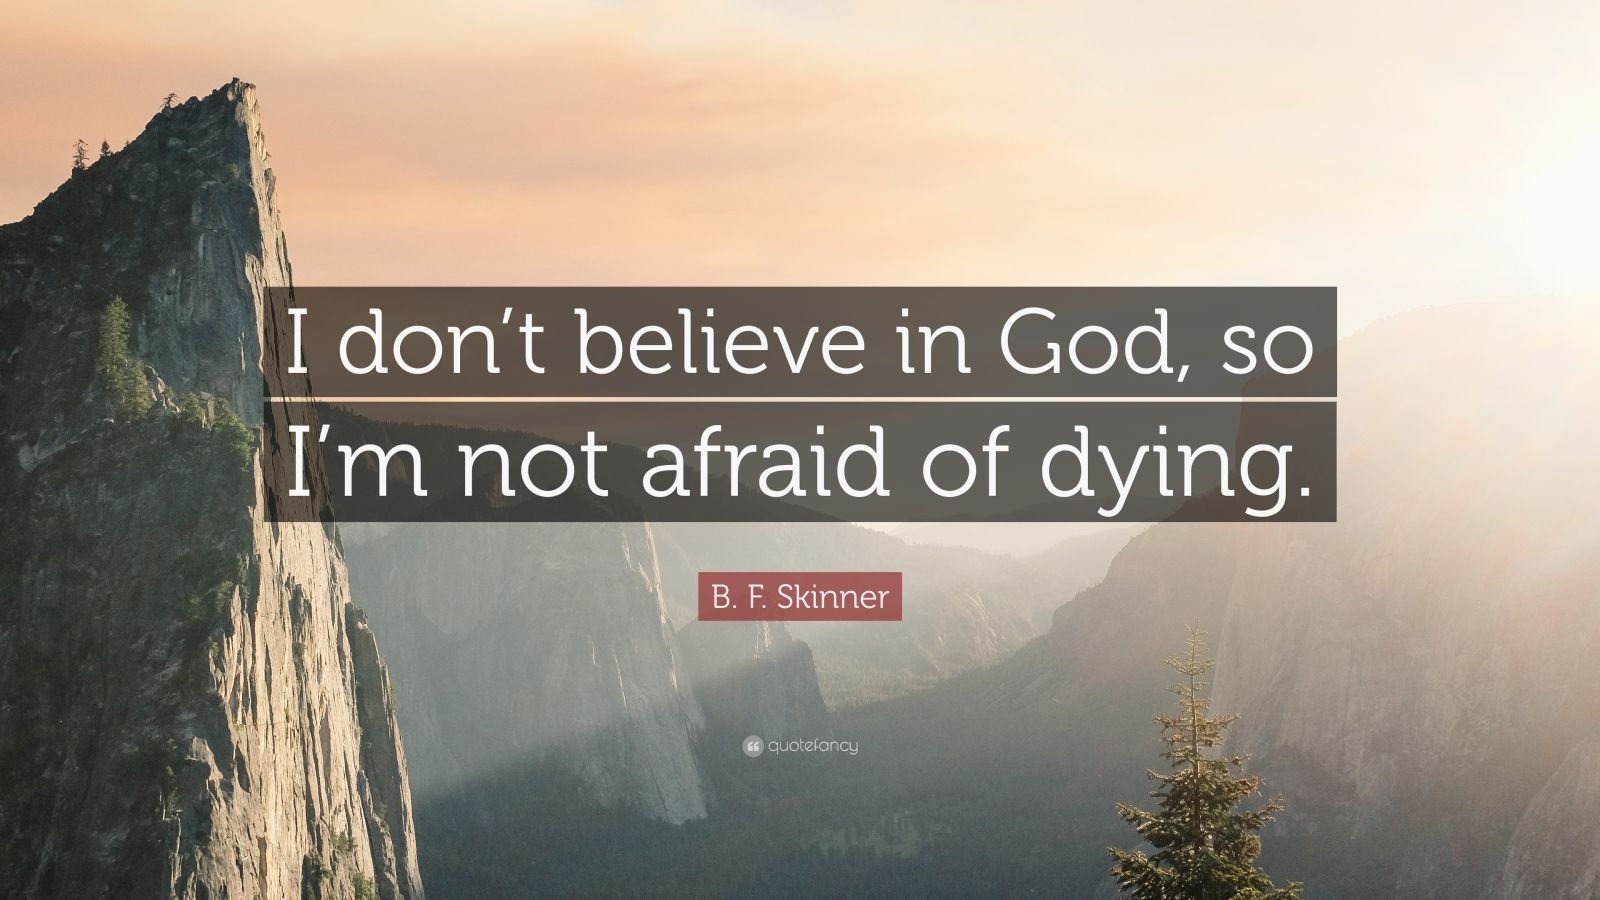 1096911 B F Skinner Quote I don t believe in God so I m not afraid of